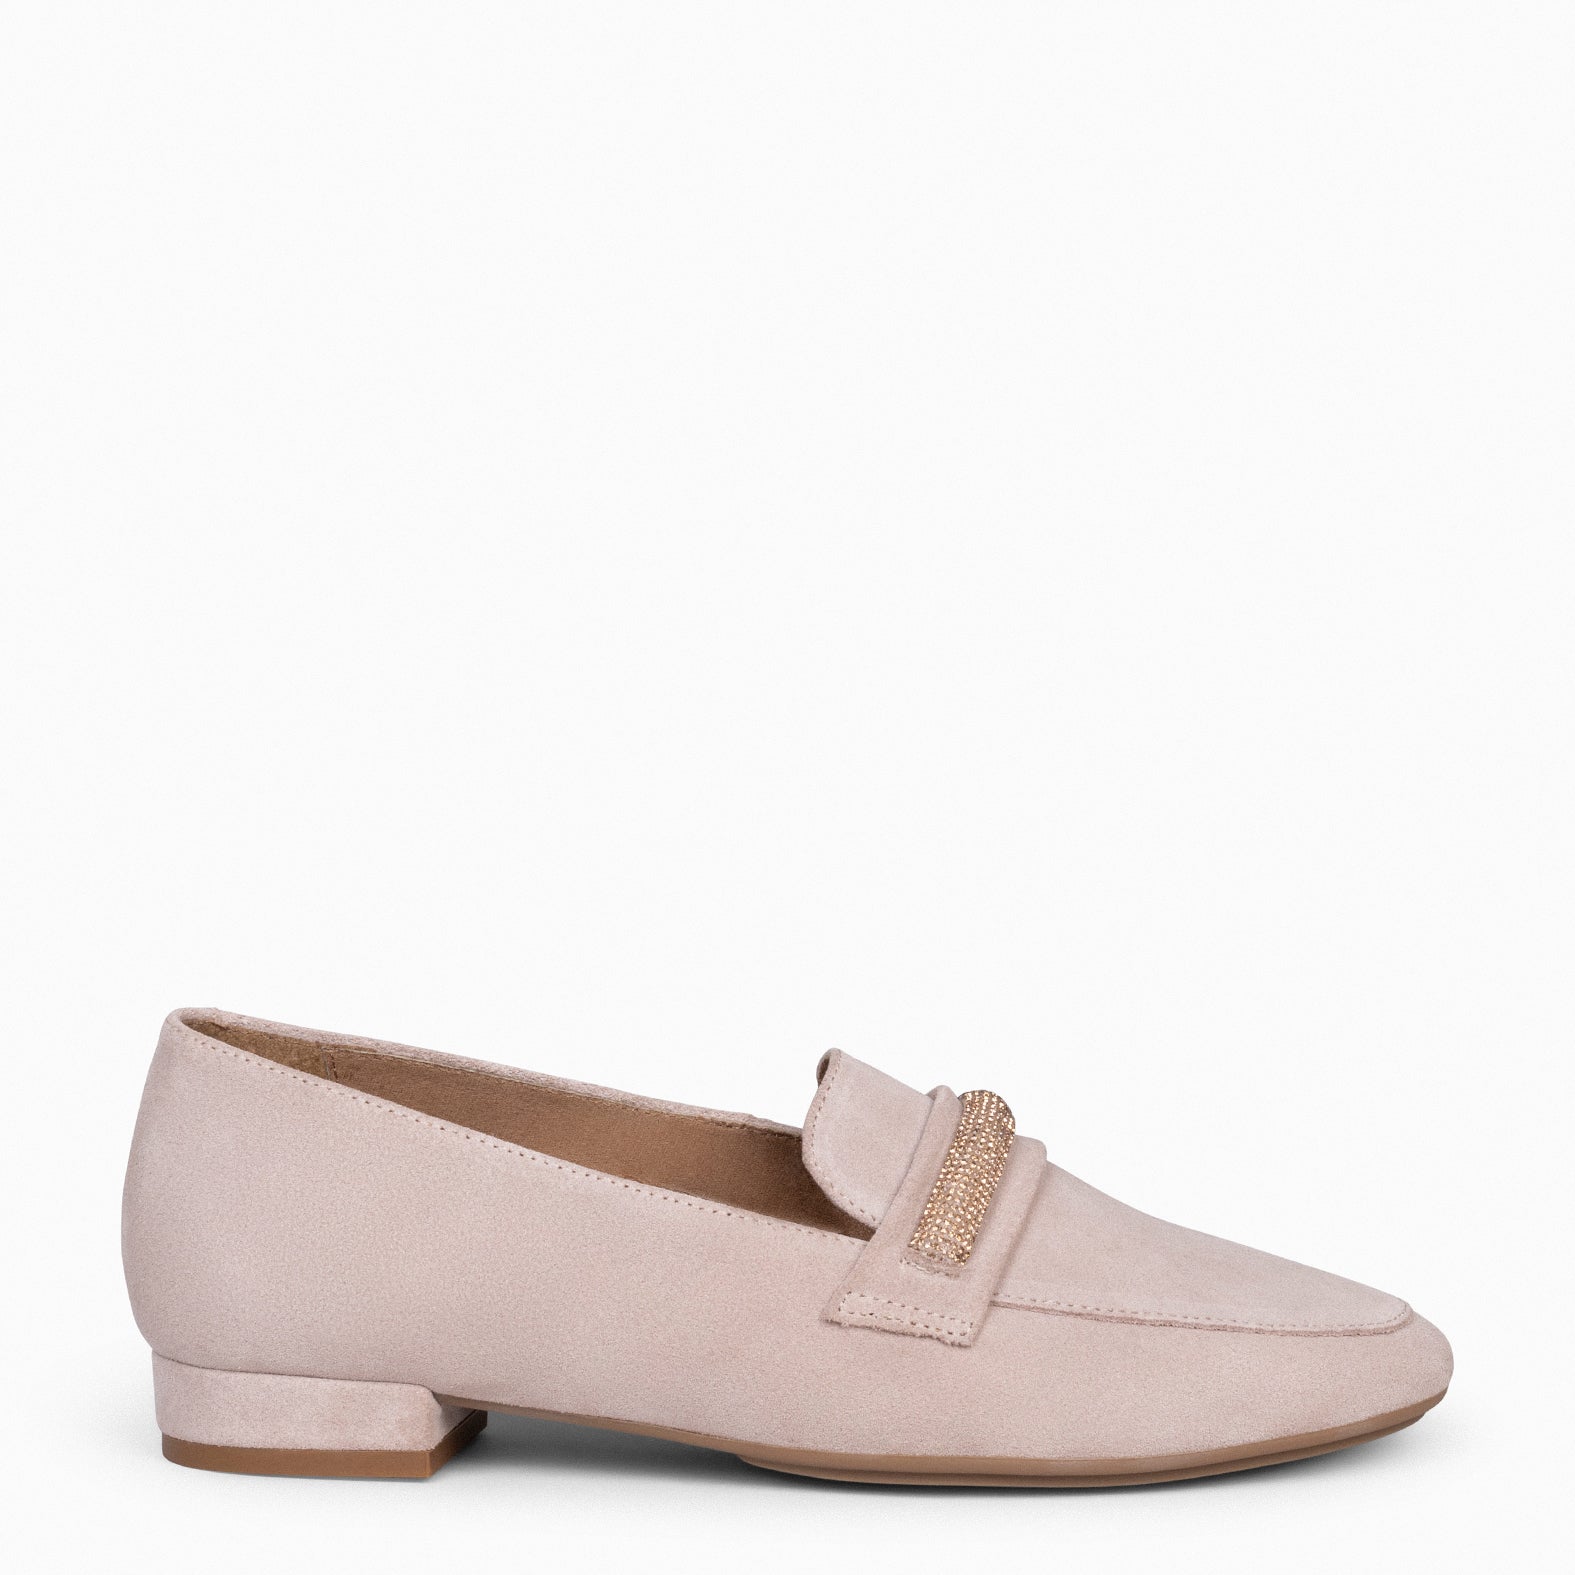 SLIPPERS BRIGHT -  NUDE moccasins